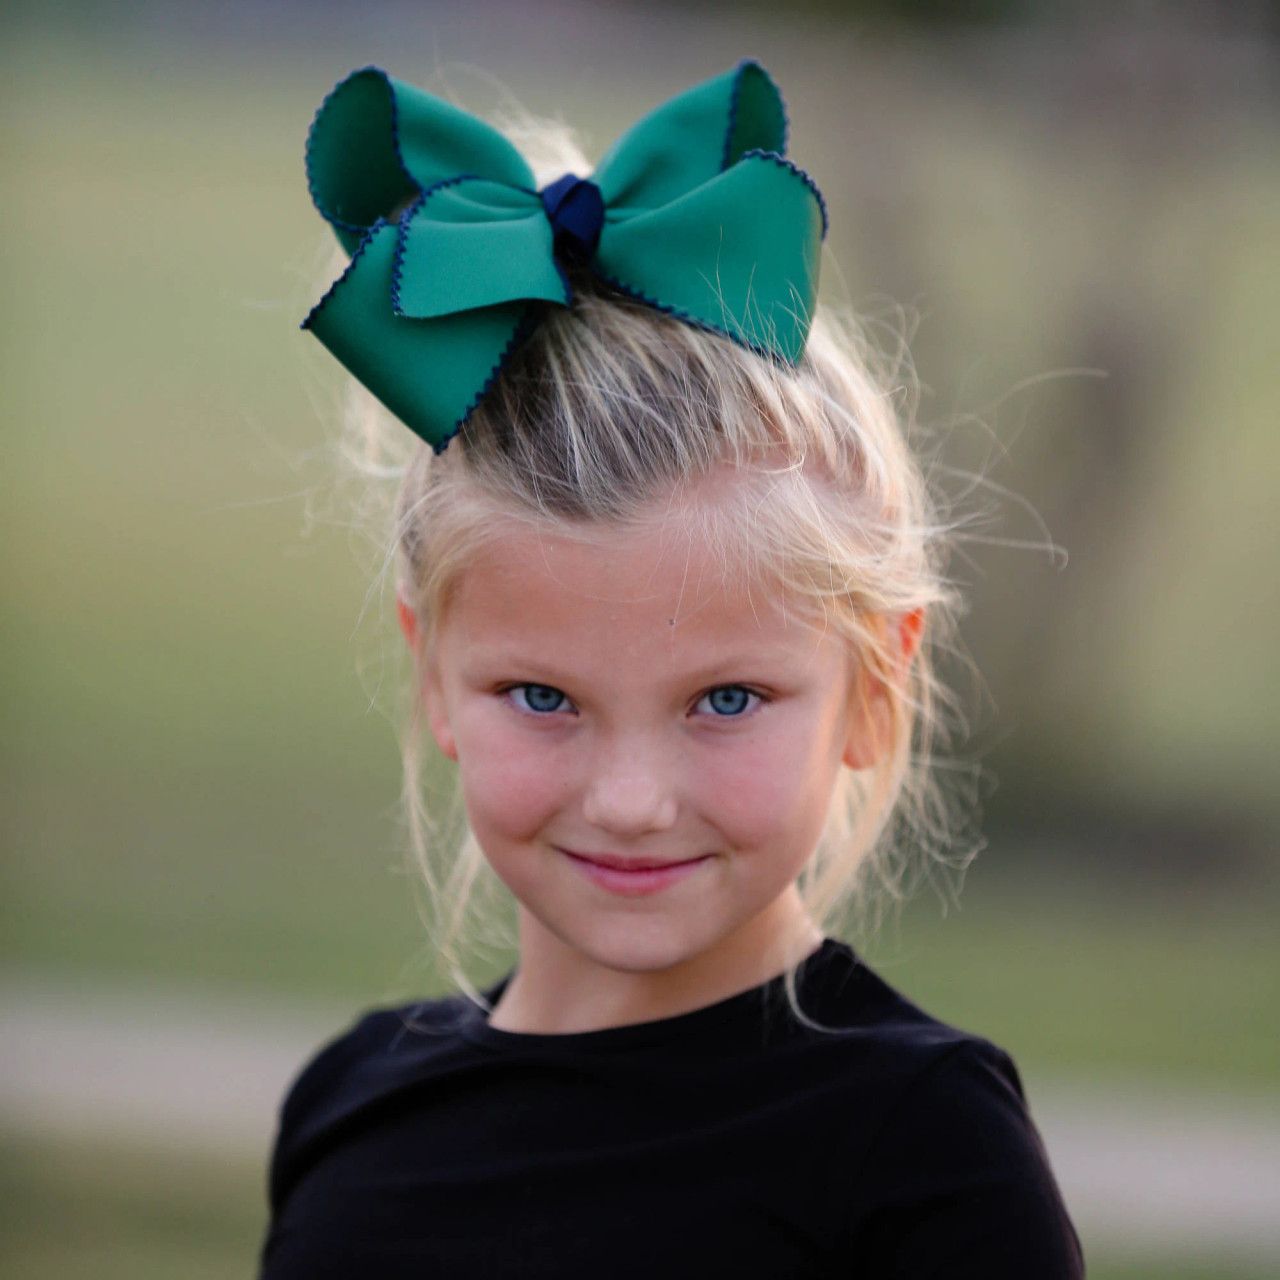 Forest Green & Navy XL Moonstitch Hair Bow